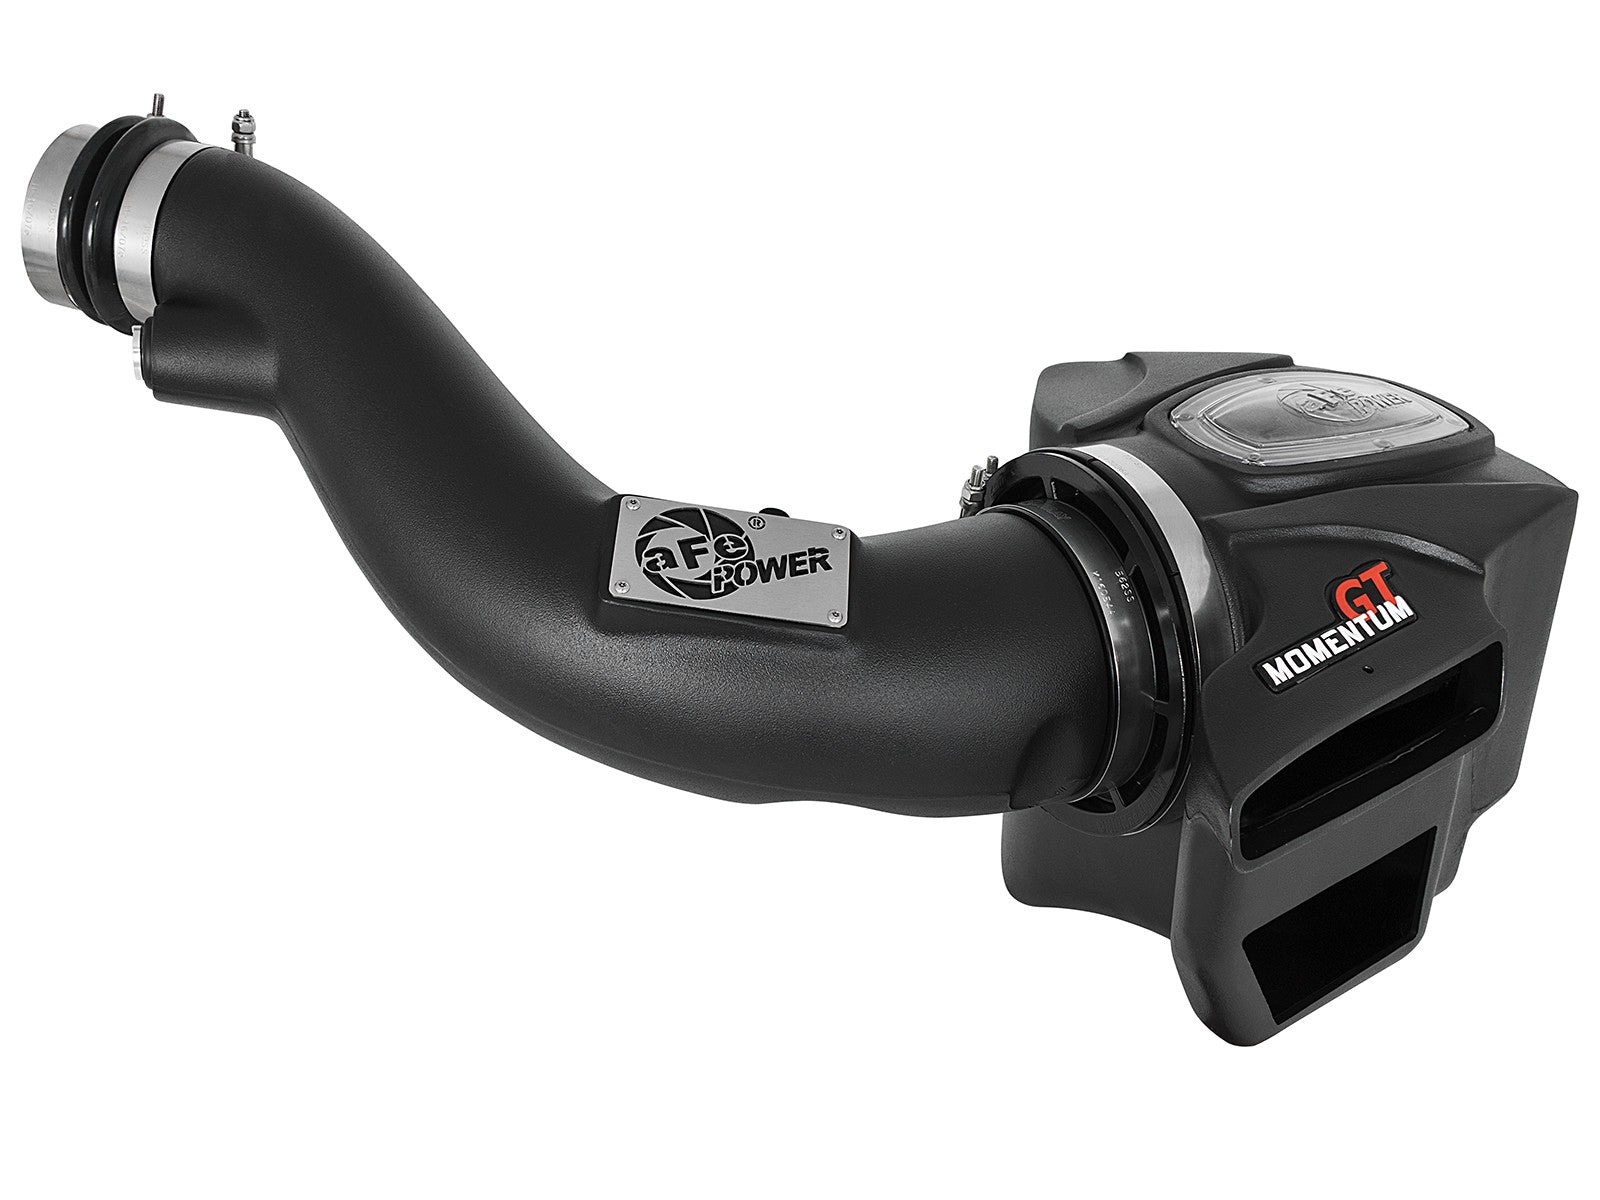 aFe Jeep V6 3.6L Momentum GT Cold Air Intake System (Durango & Grand Cherokee) - Pro Dry S - ML Performance UK